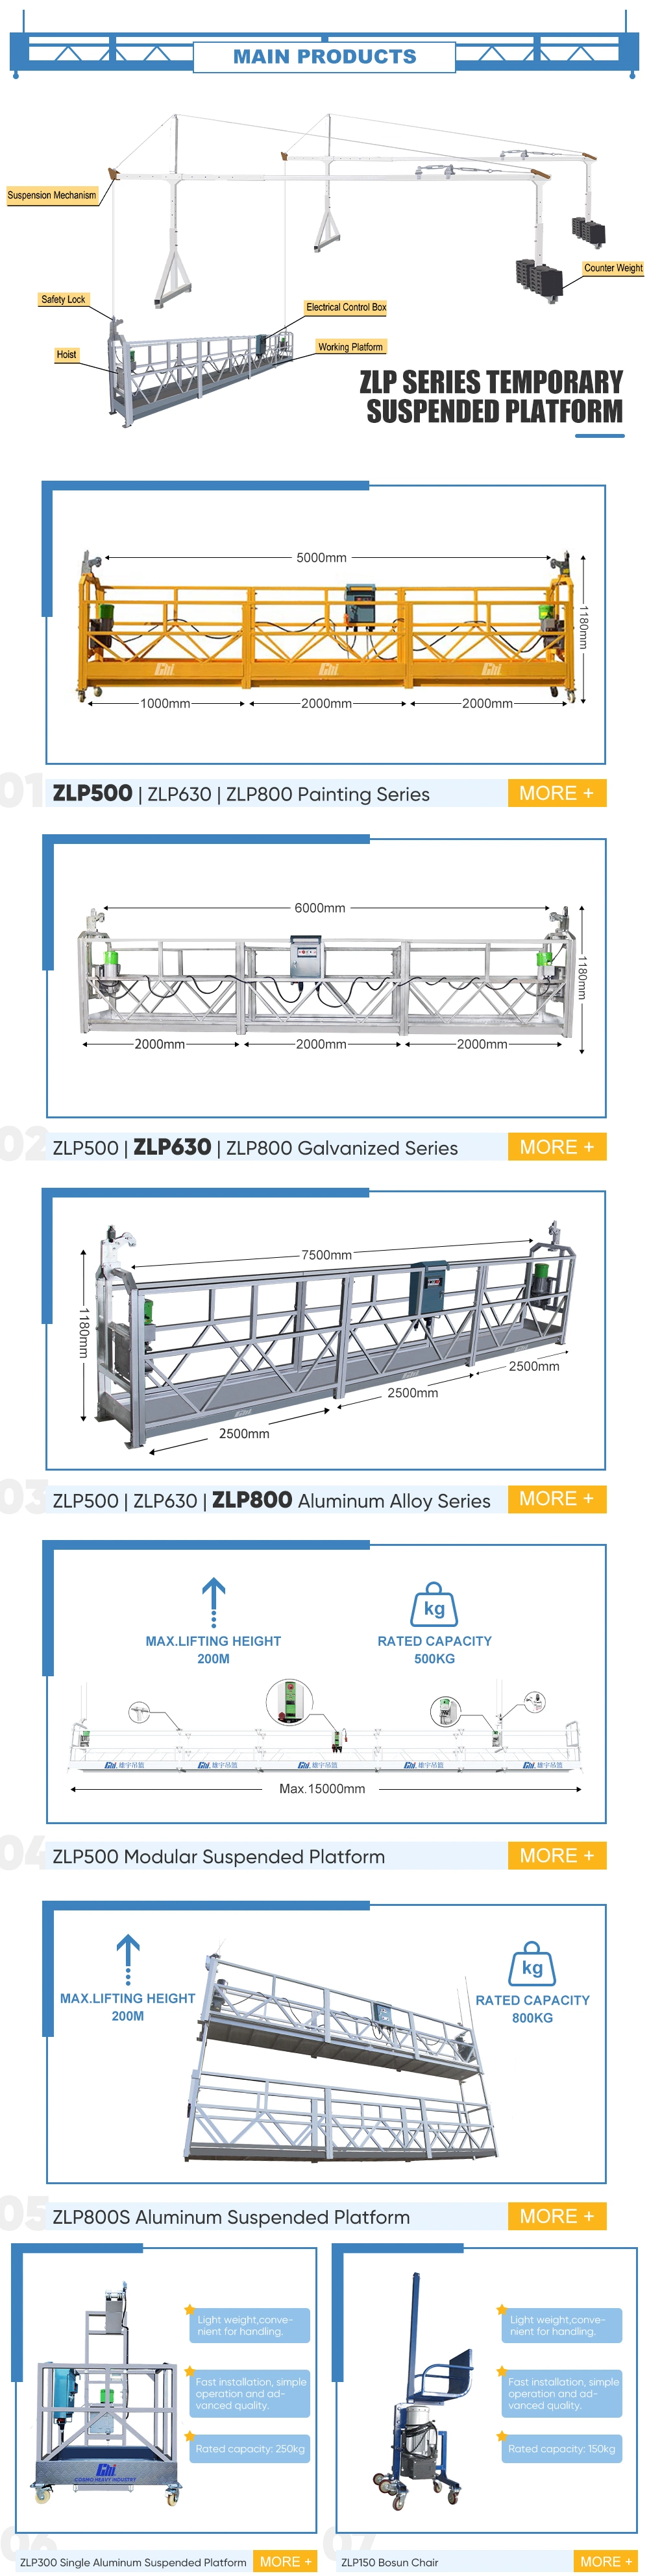 Zlp800 Pin Type Aluminum Alloy Suspended Platform with Israel Standard by Sii